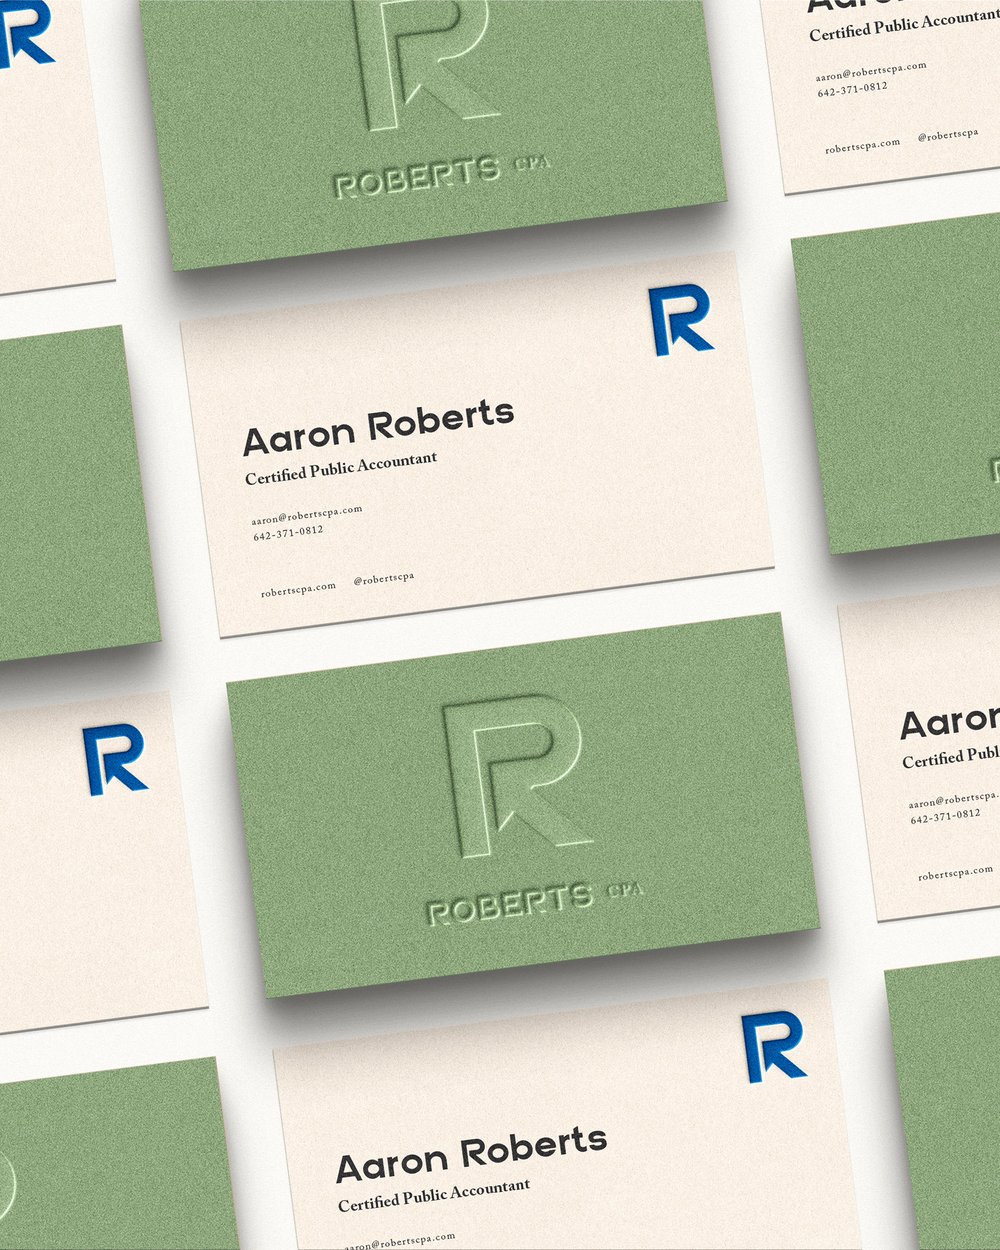 Roberts CPA Business Cards.jpg